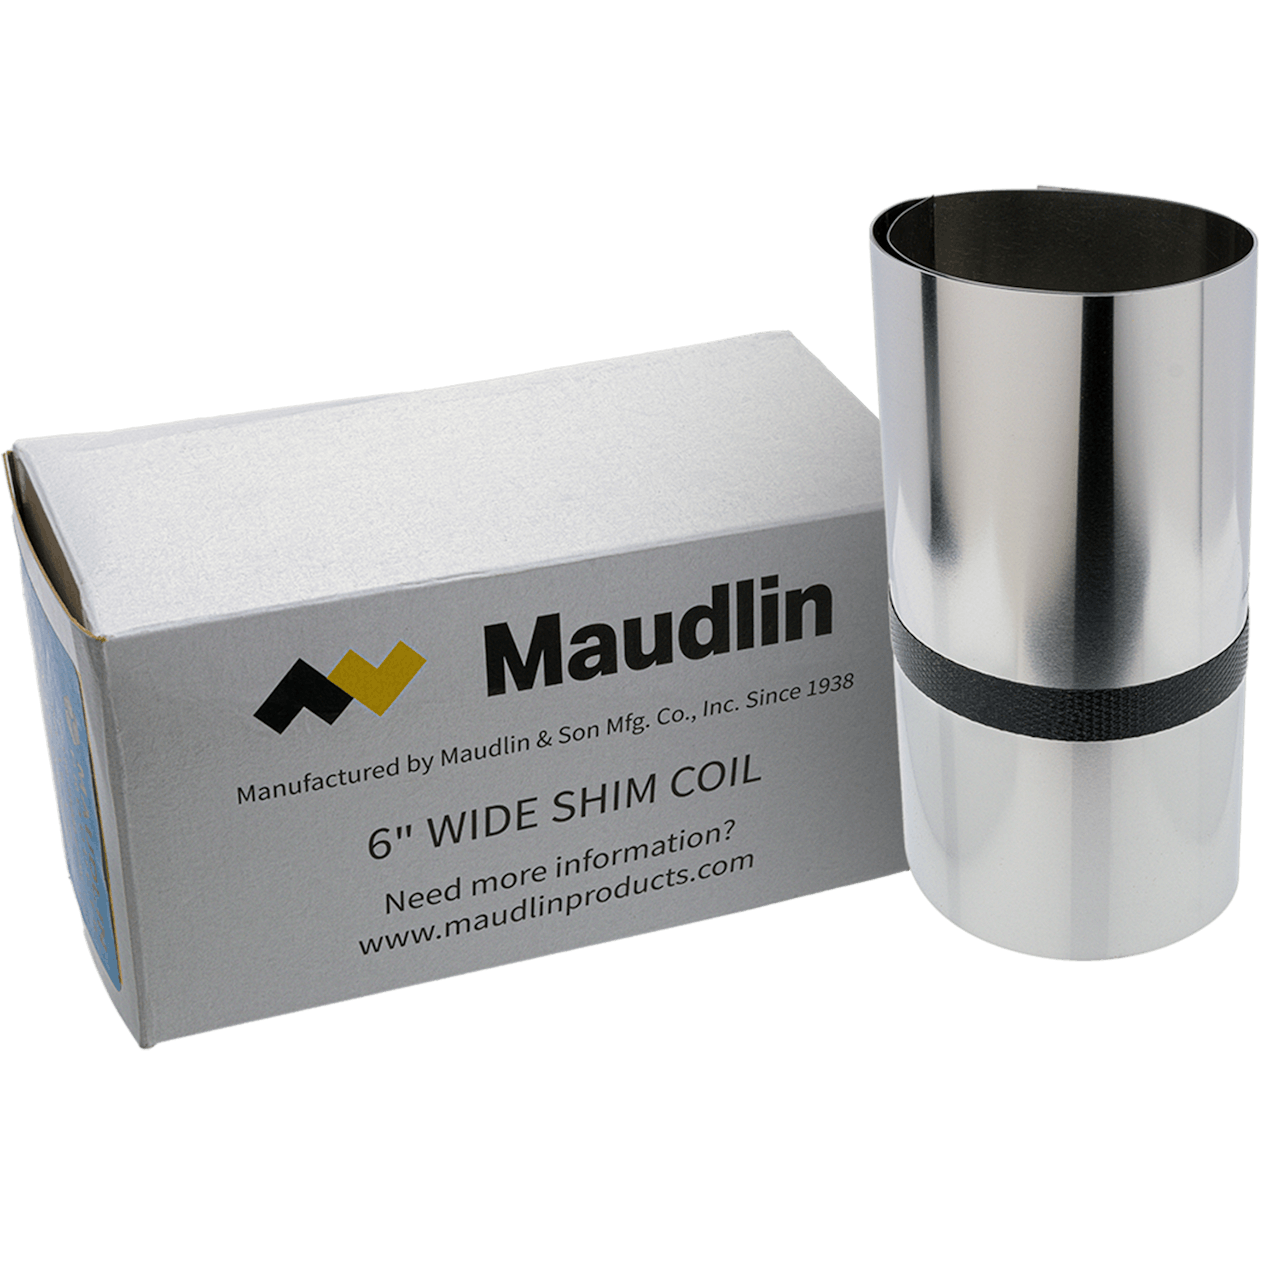 Coil shim stock from Maudlin